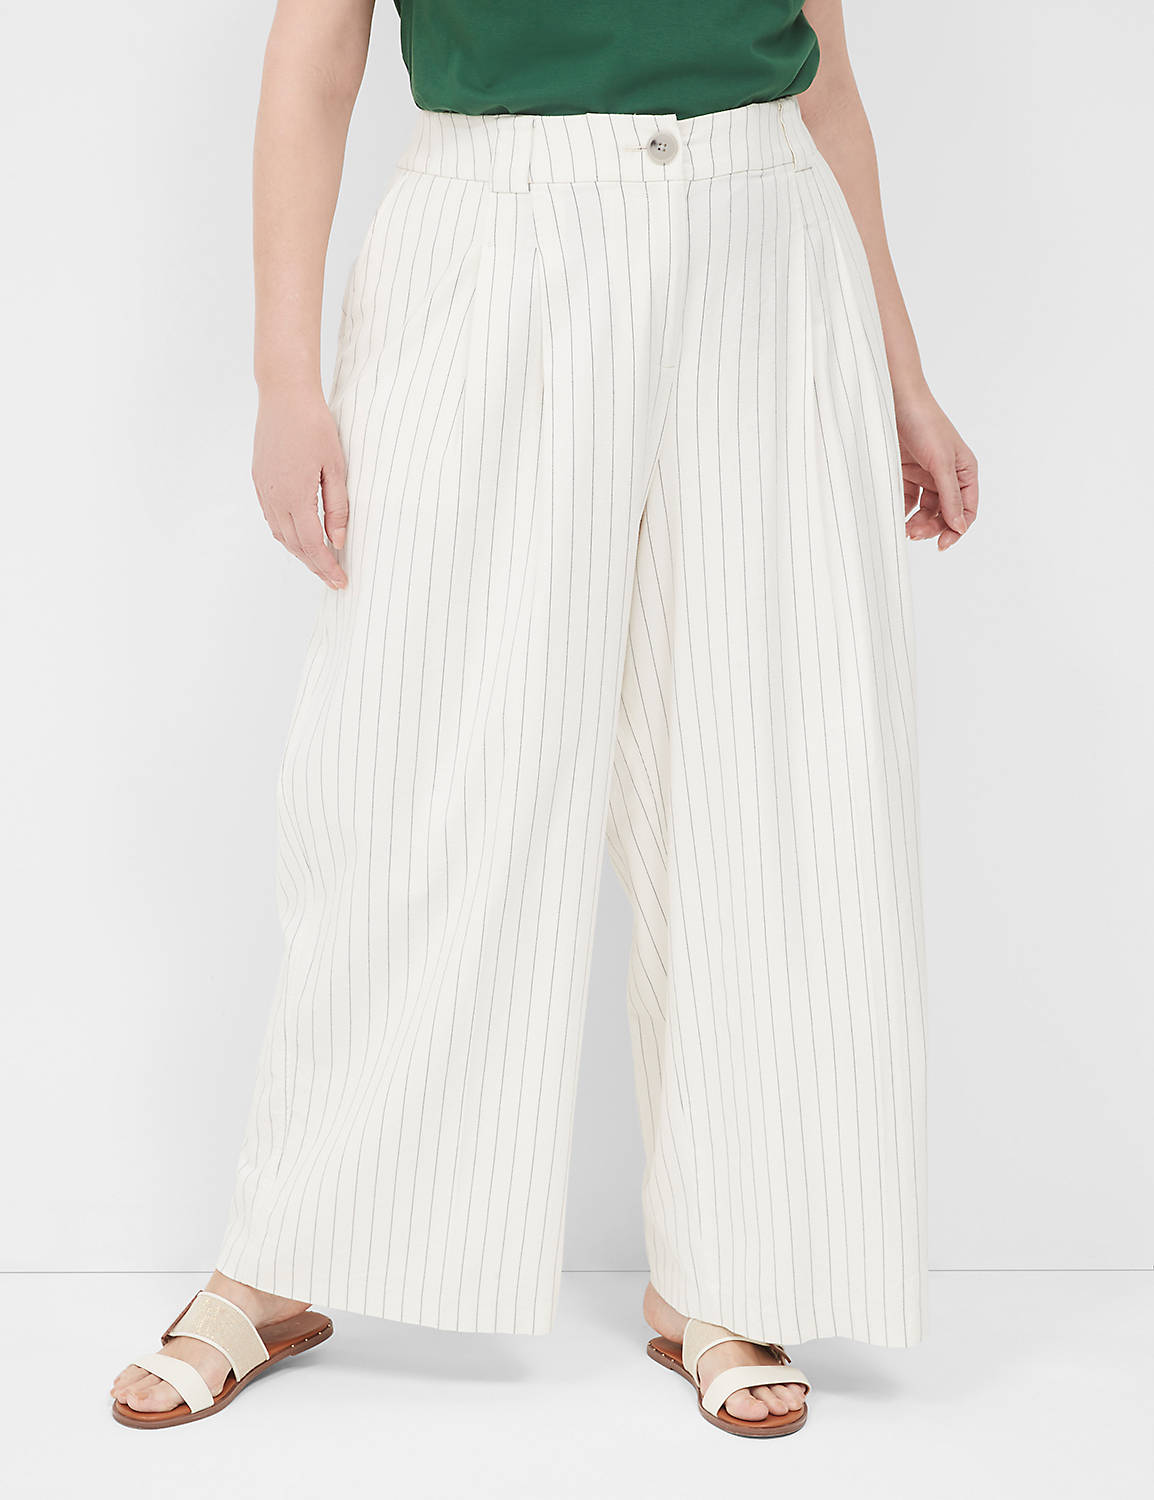 THE PLEATED WIDELEG - PINSTRIPE 113 Product Image 1